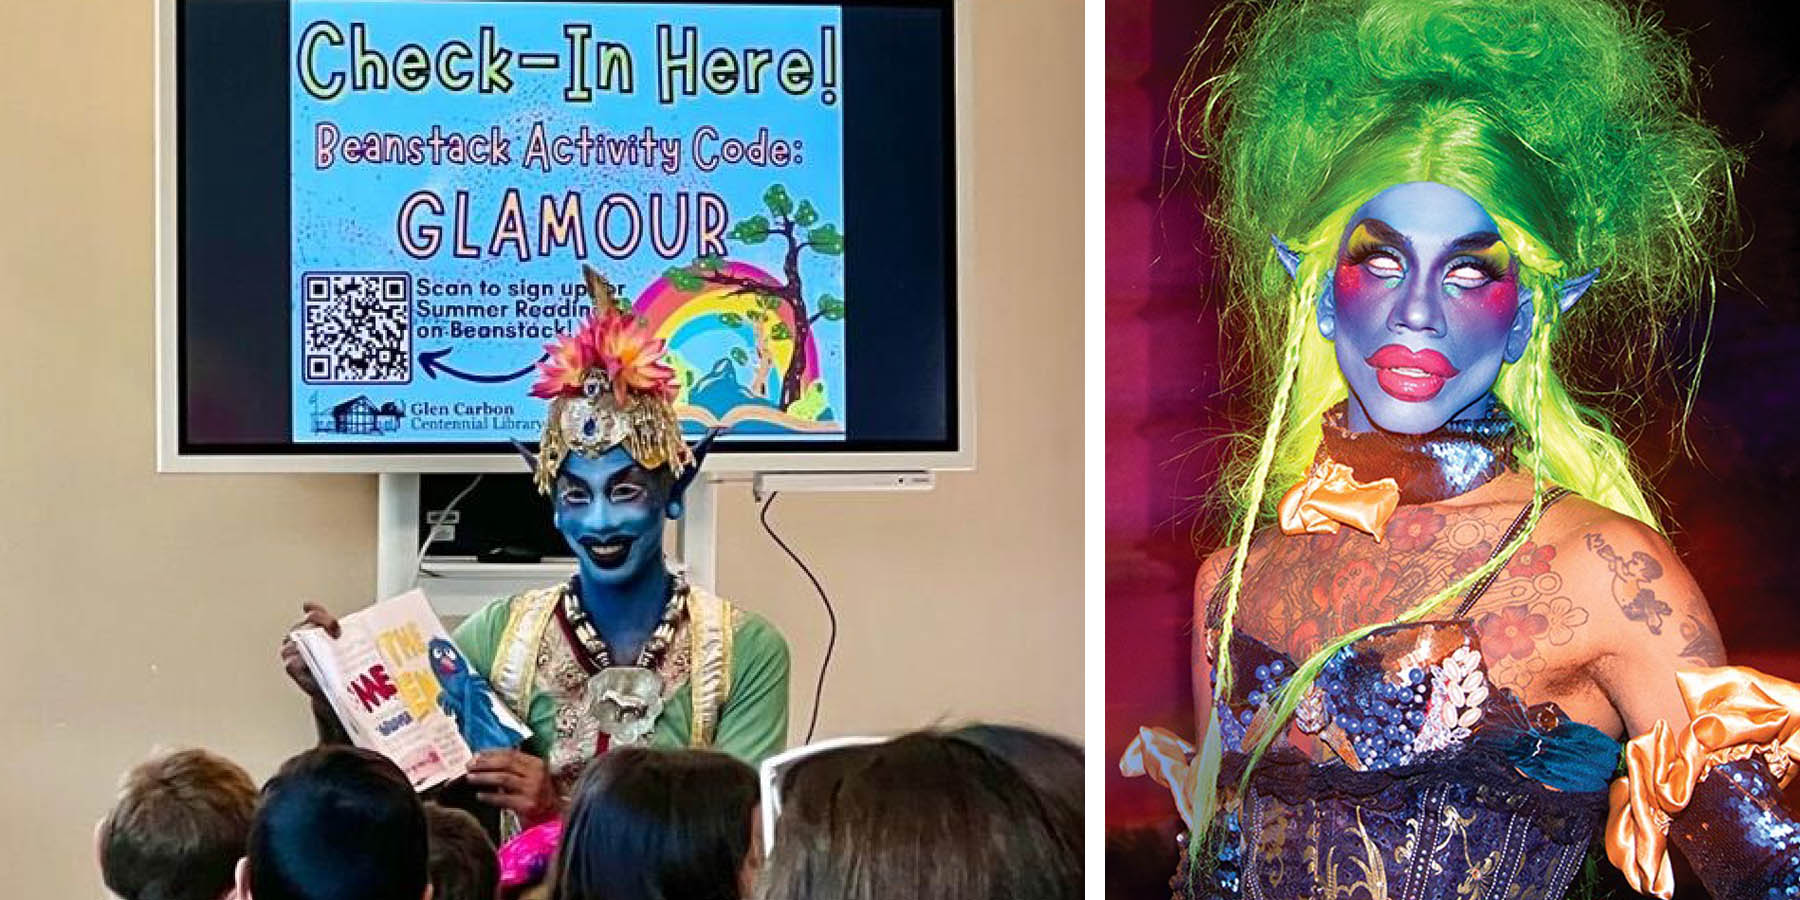 Emails show St. Louis librarians recruiting drag performers for storytime events with children